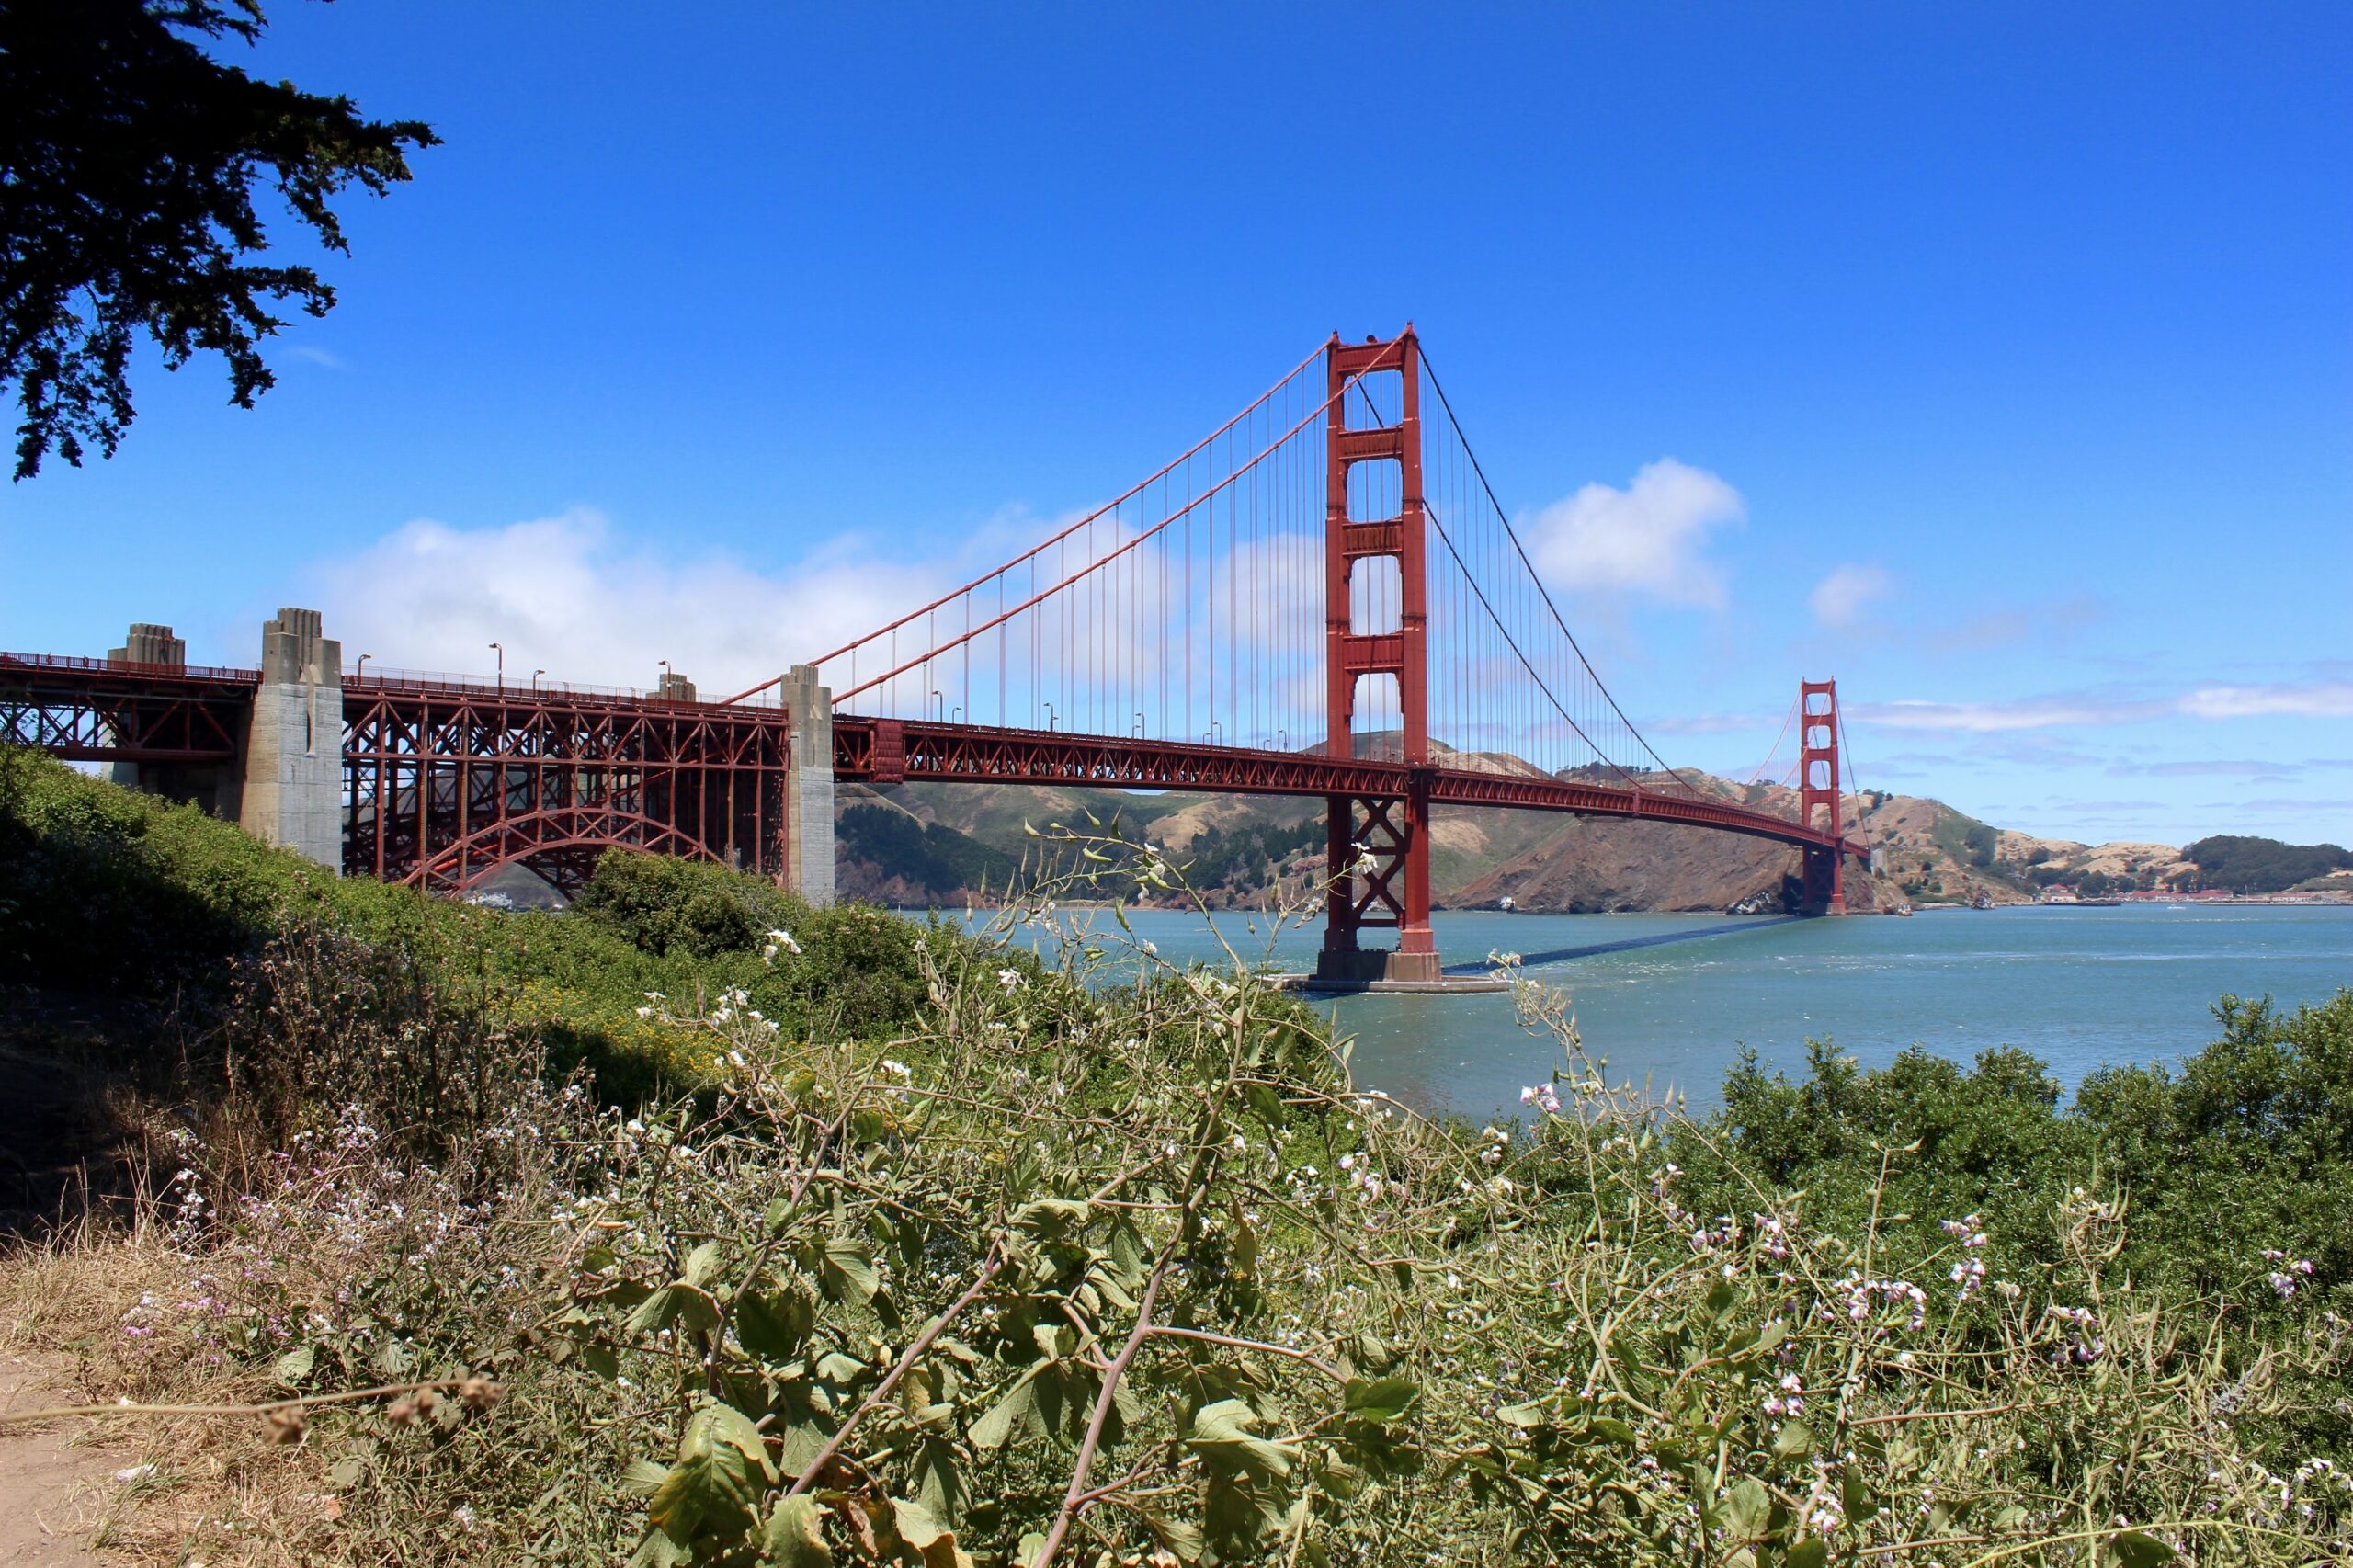 Meet other singles: 5-mile hike in the Presidio of San Francisco